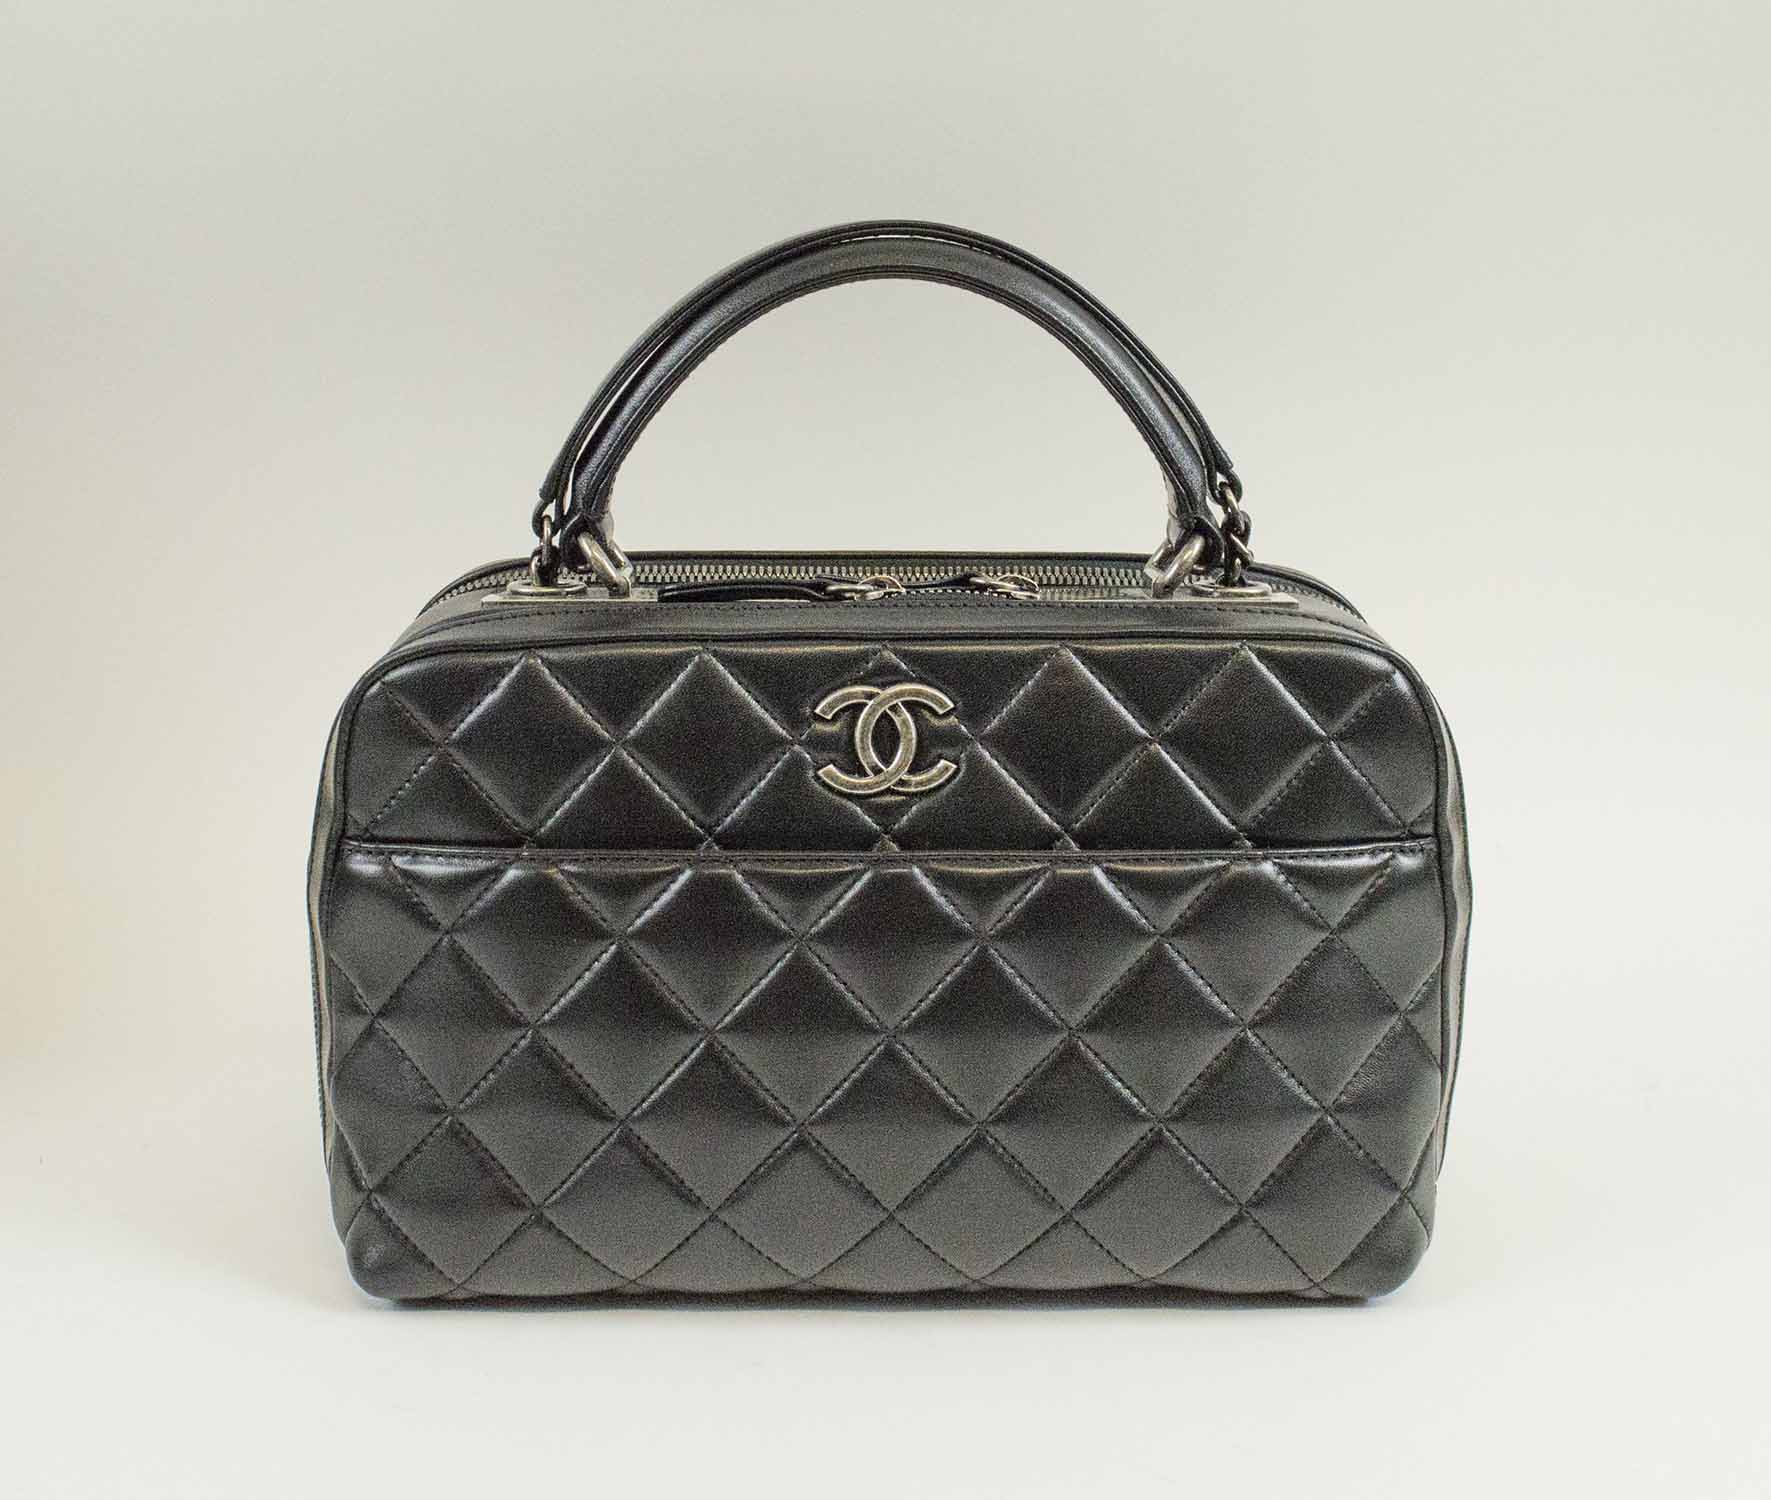 Chanel Black Quilted Lambskin Leather CC Bowler Bag